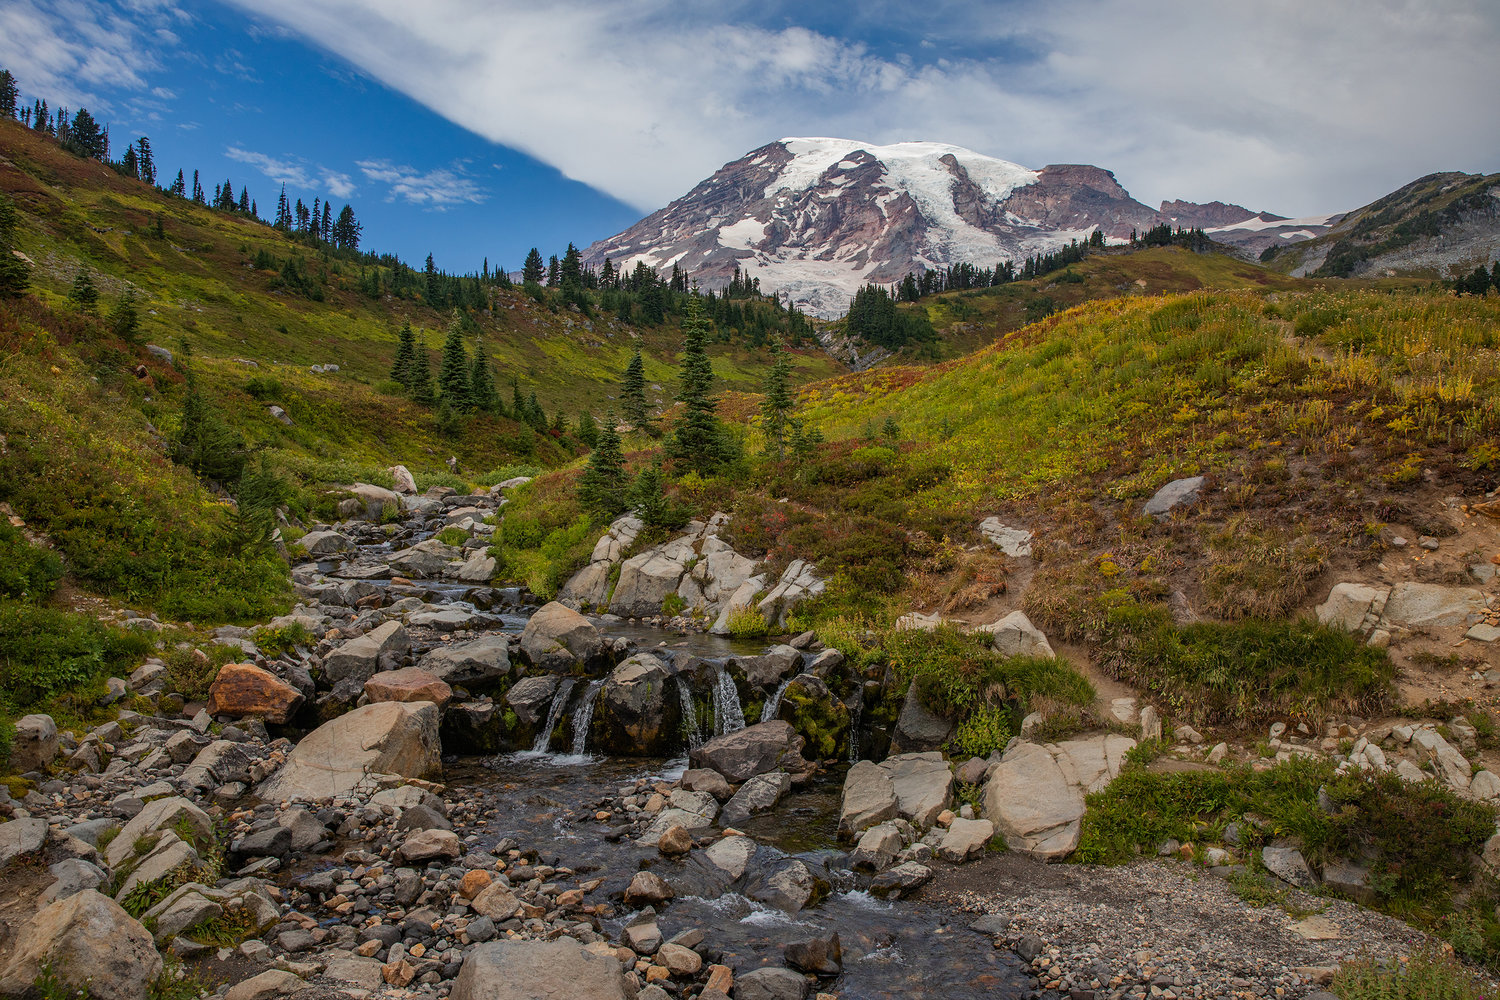 Mount Rainier sets the backdrop as water trickles down rocks near Myrtle Falls in Paradise on Wednesday.